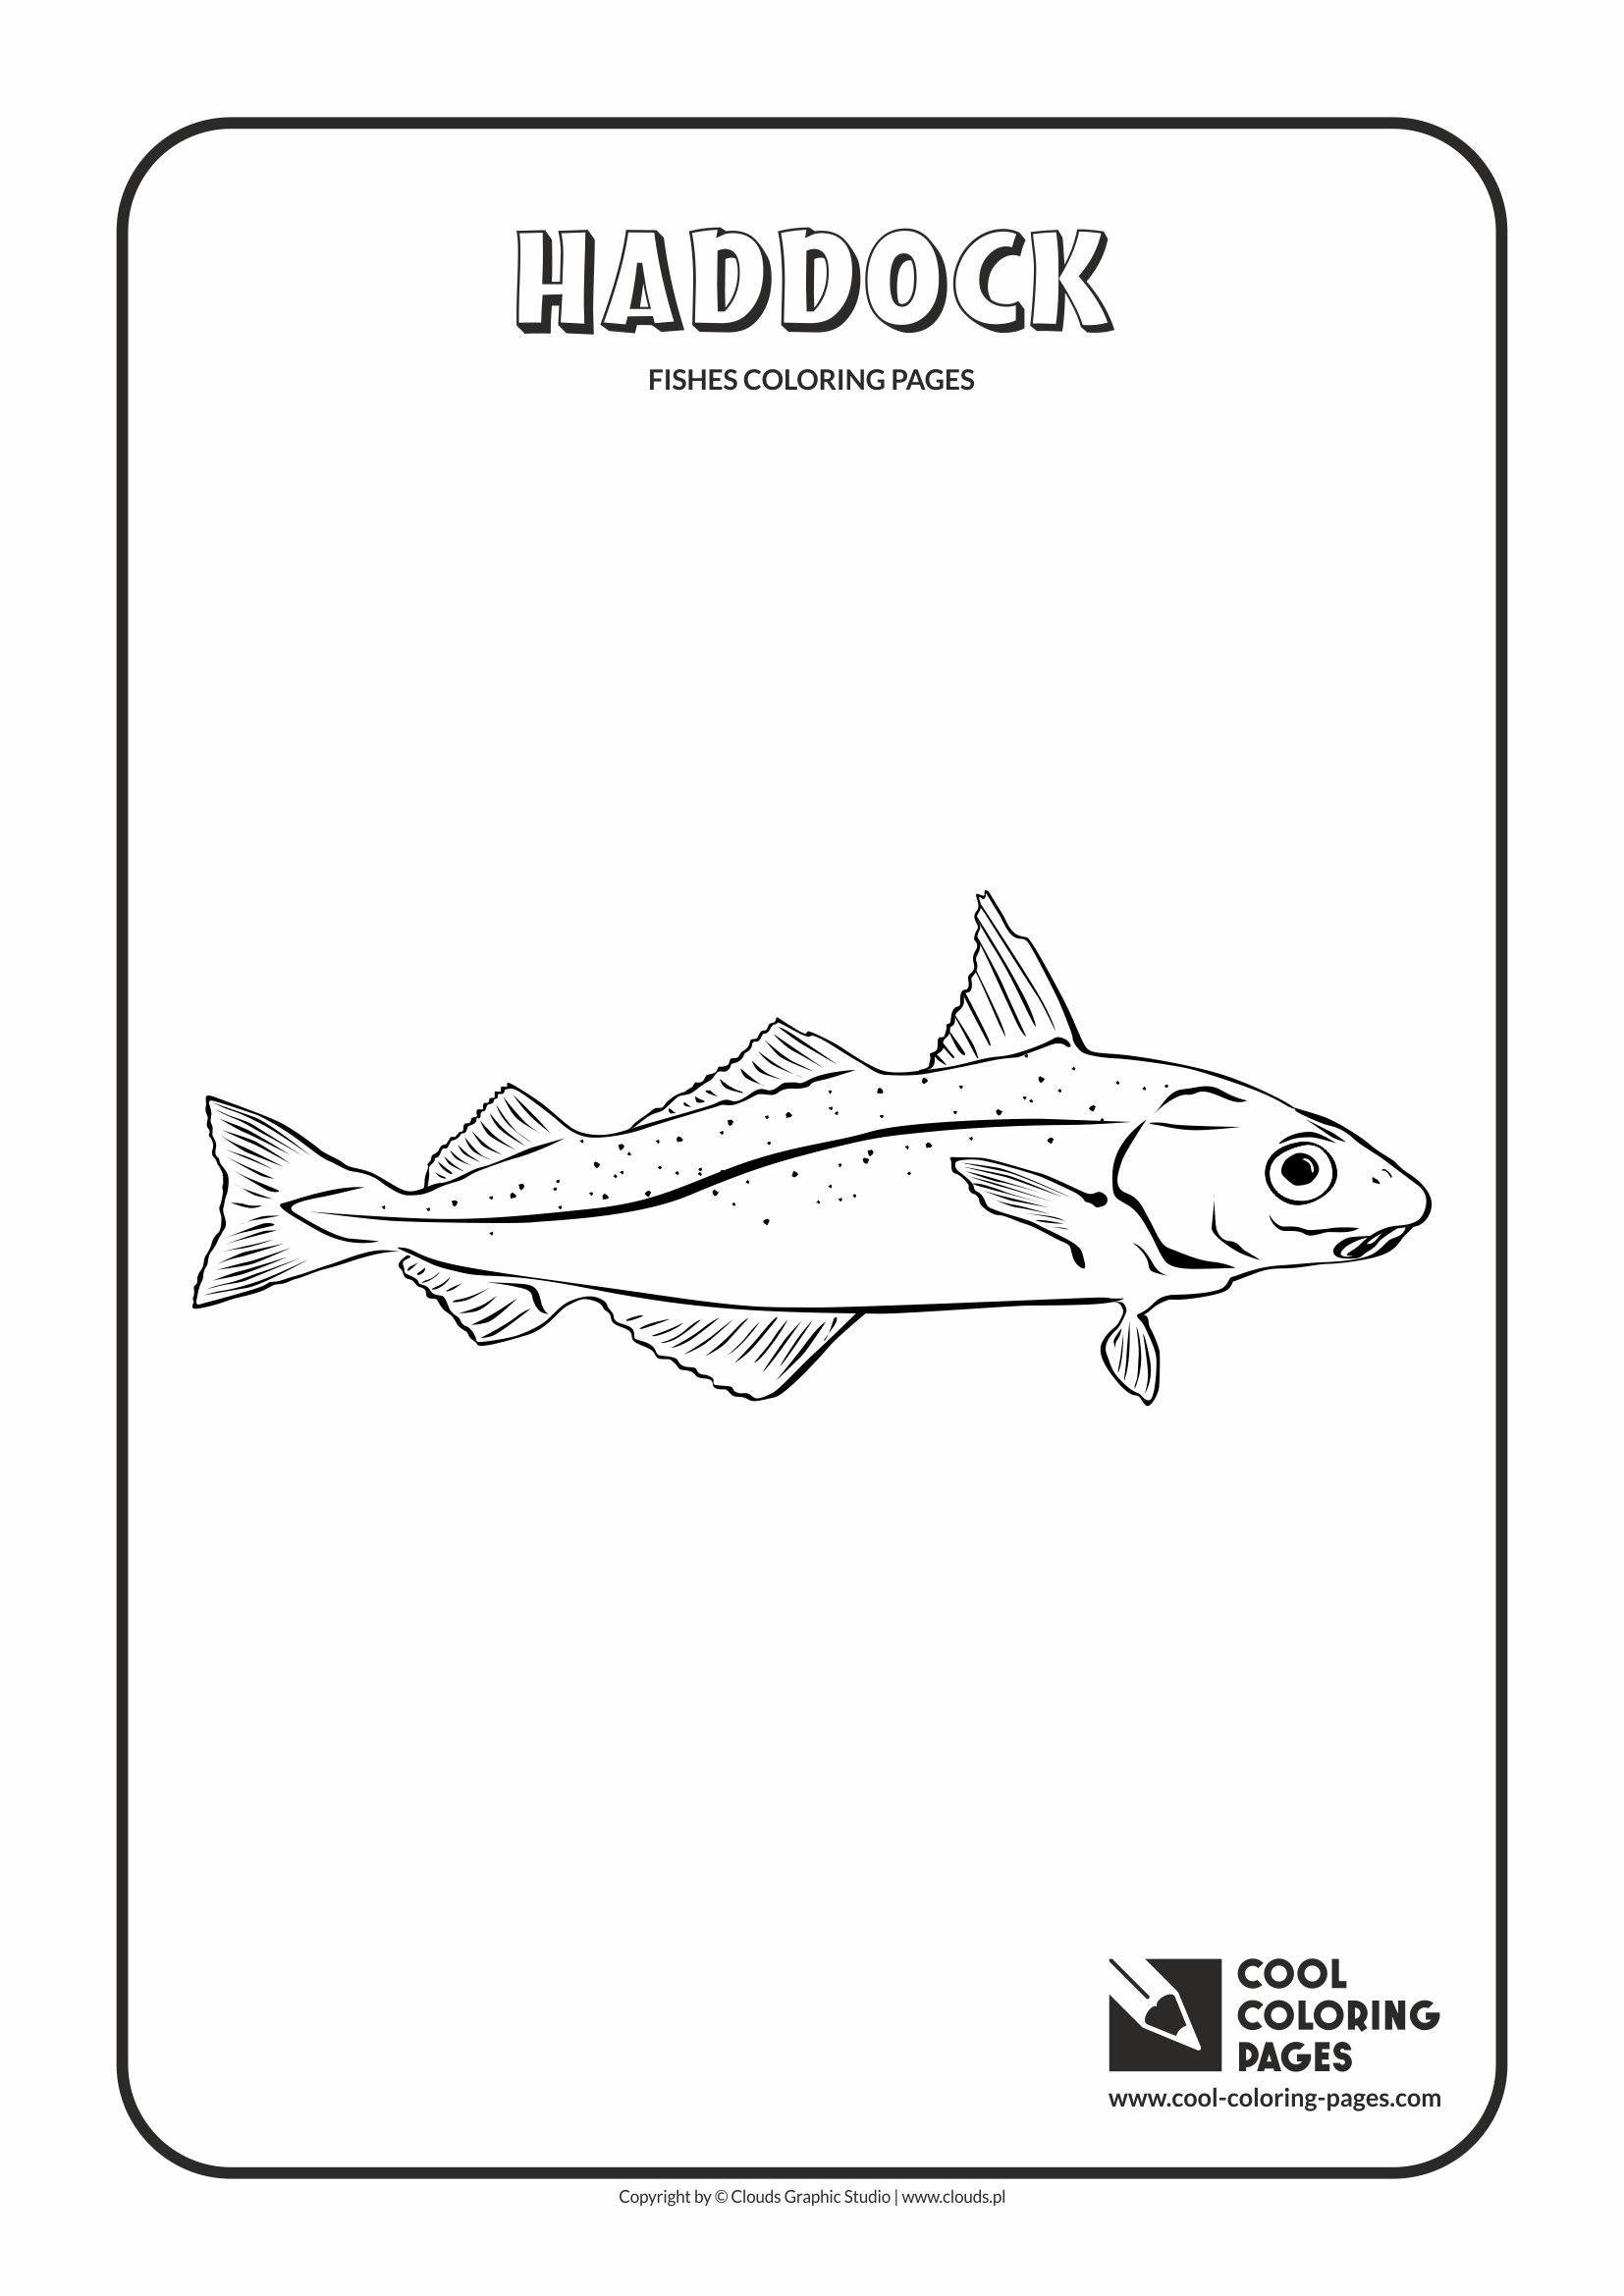 Cool Coloring Pages - Animals / Haddock / Coloring page with haddock